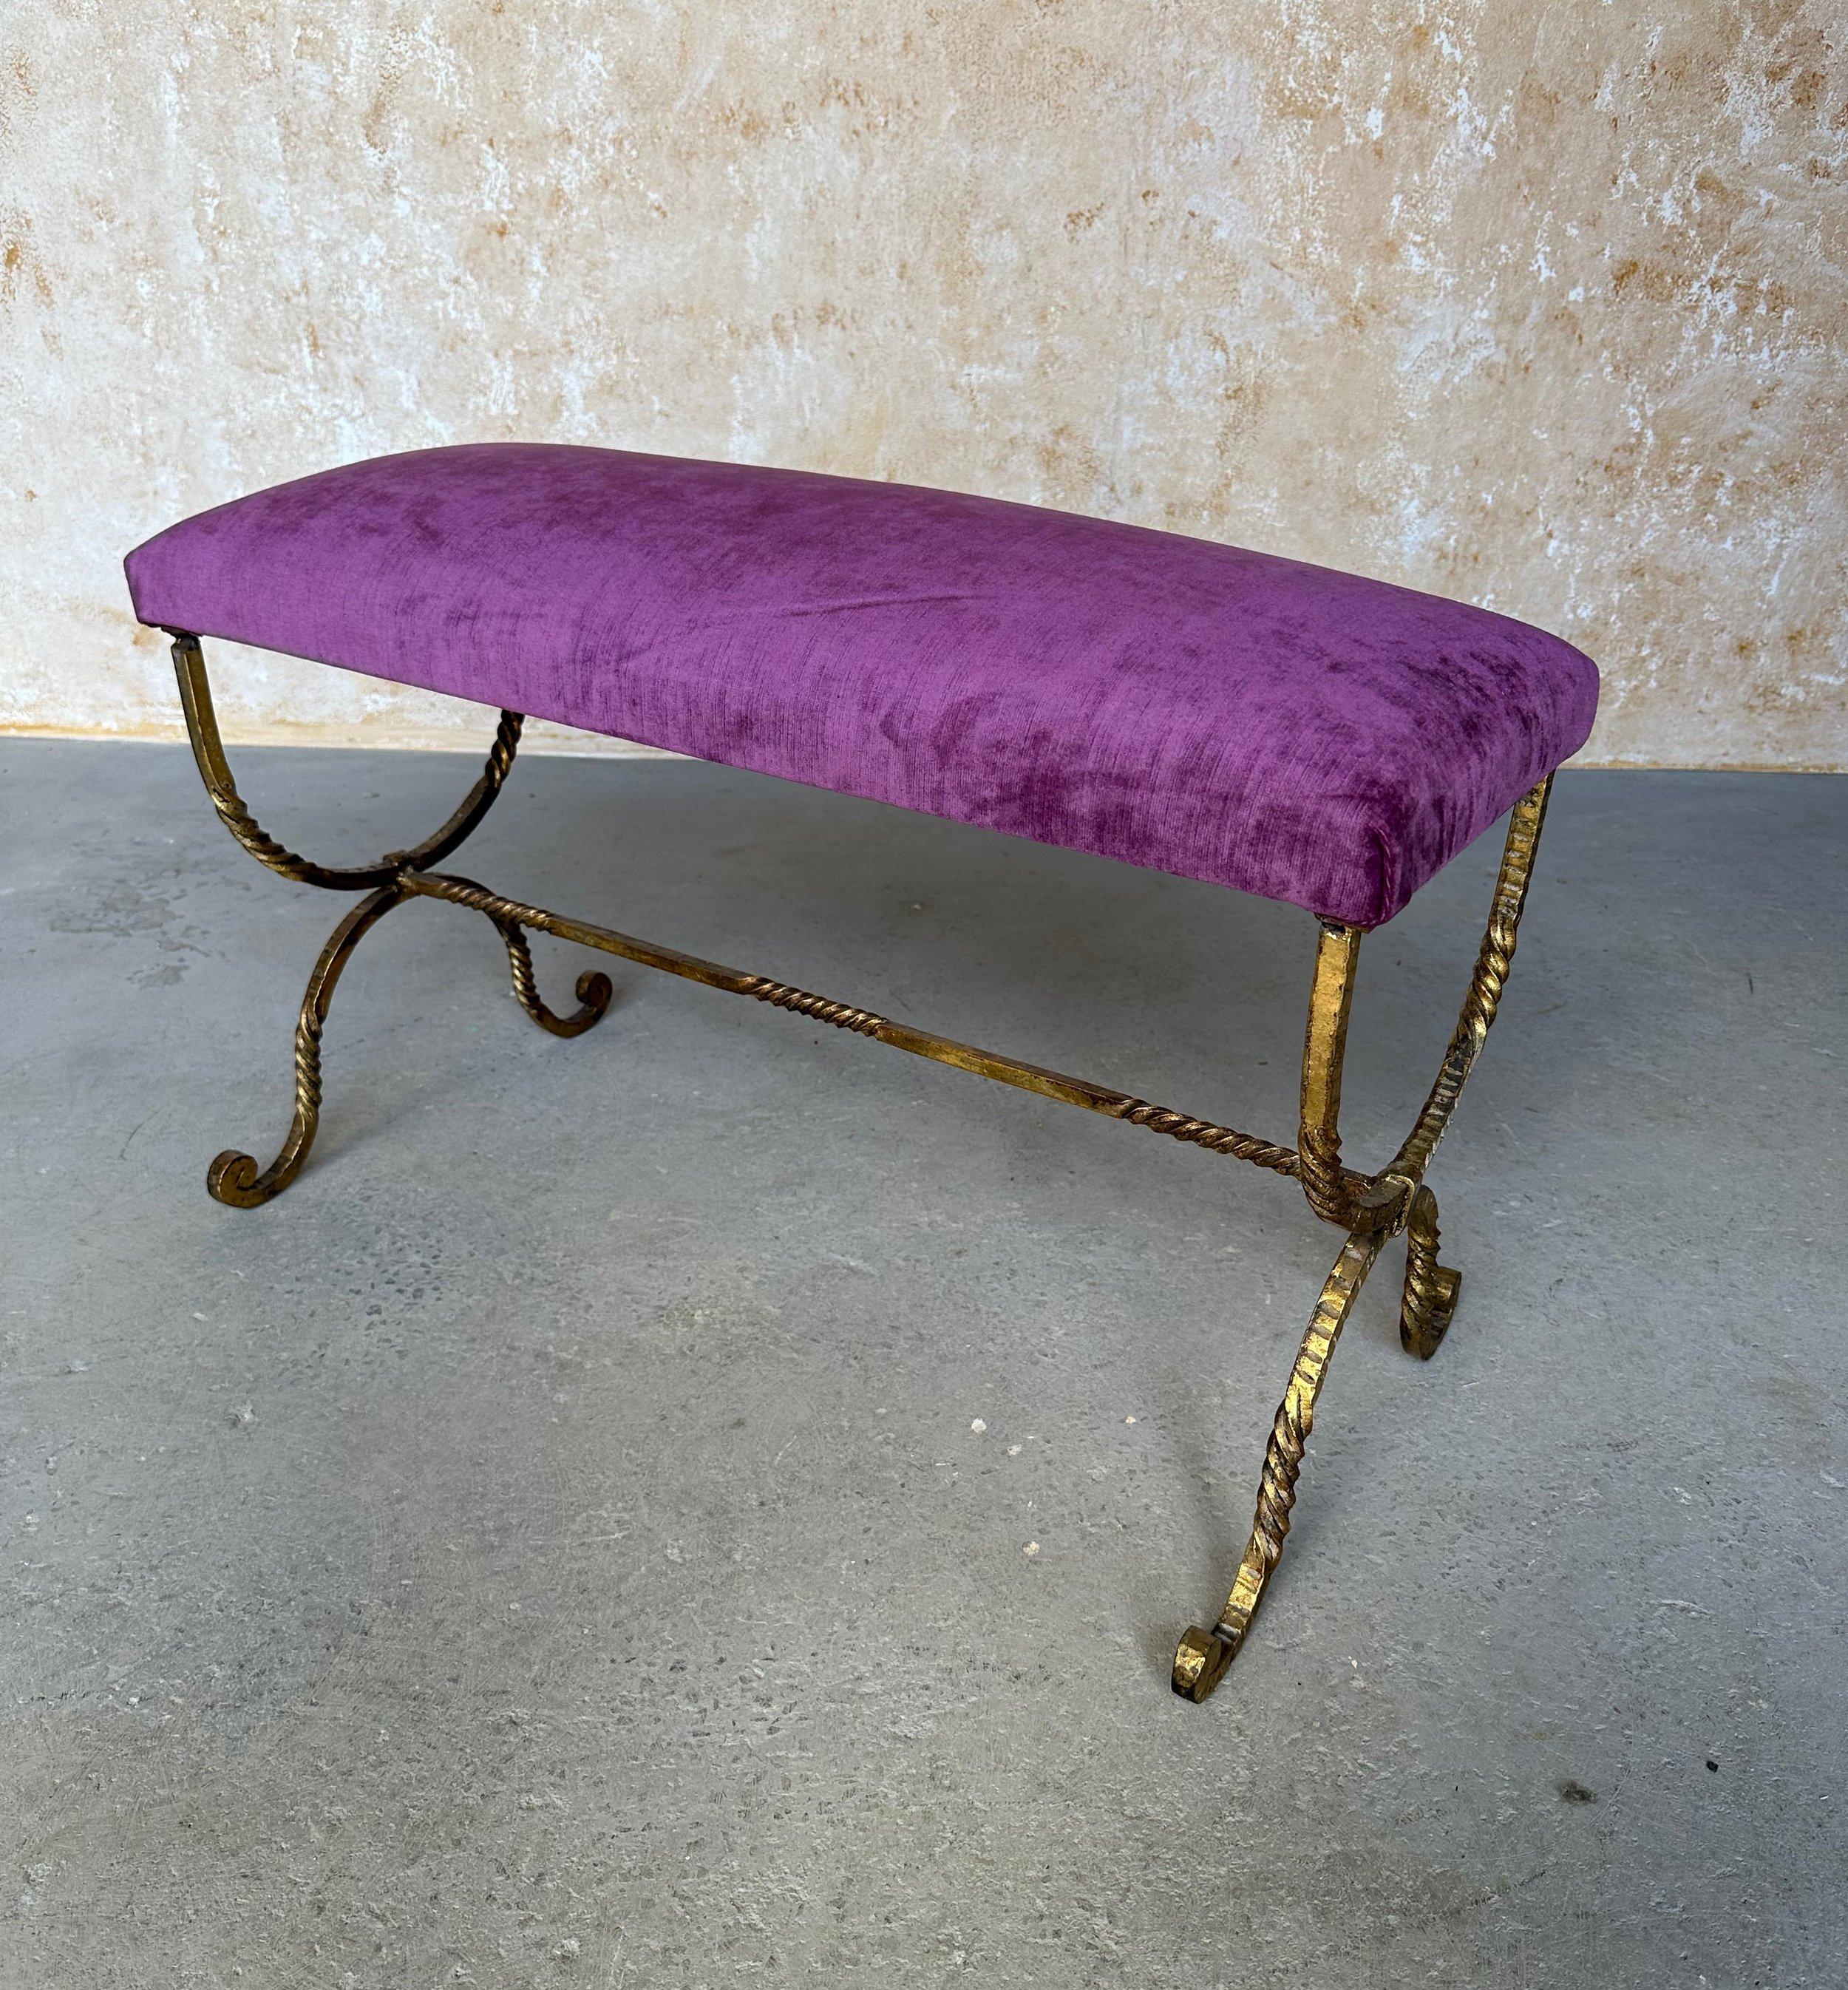 This elegant vintage 1950s Spanish gilt iron bench features an ornate, elaborately twisted hand forged hourglass frame with a decorative central stretcher and beautifully scrolled feet. The rich gilt finish is hand-applied and the seat is